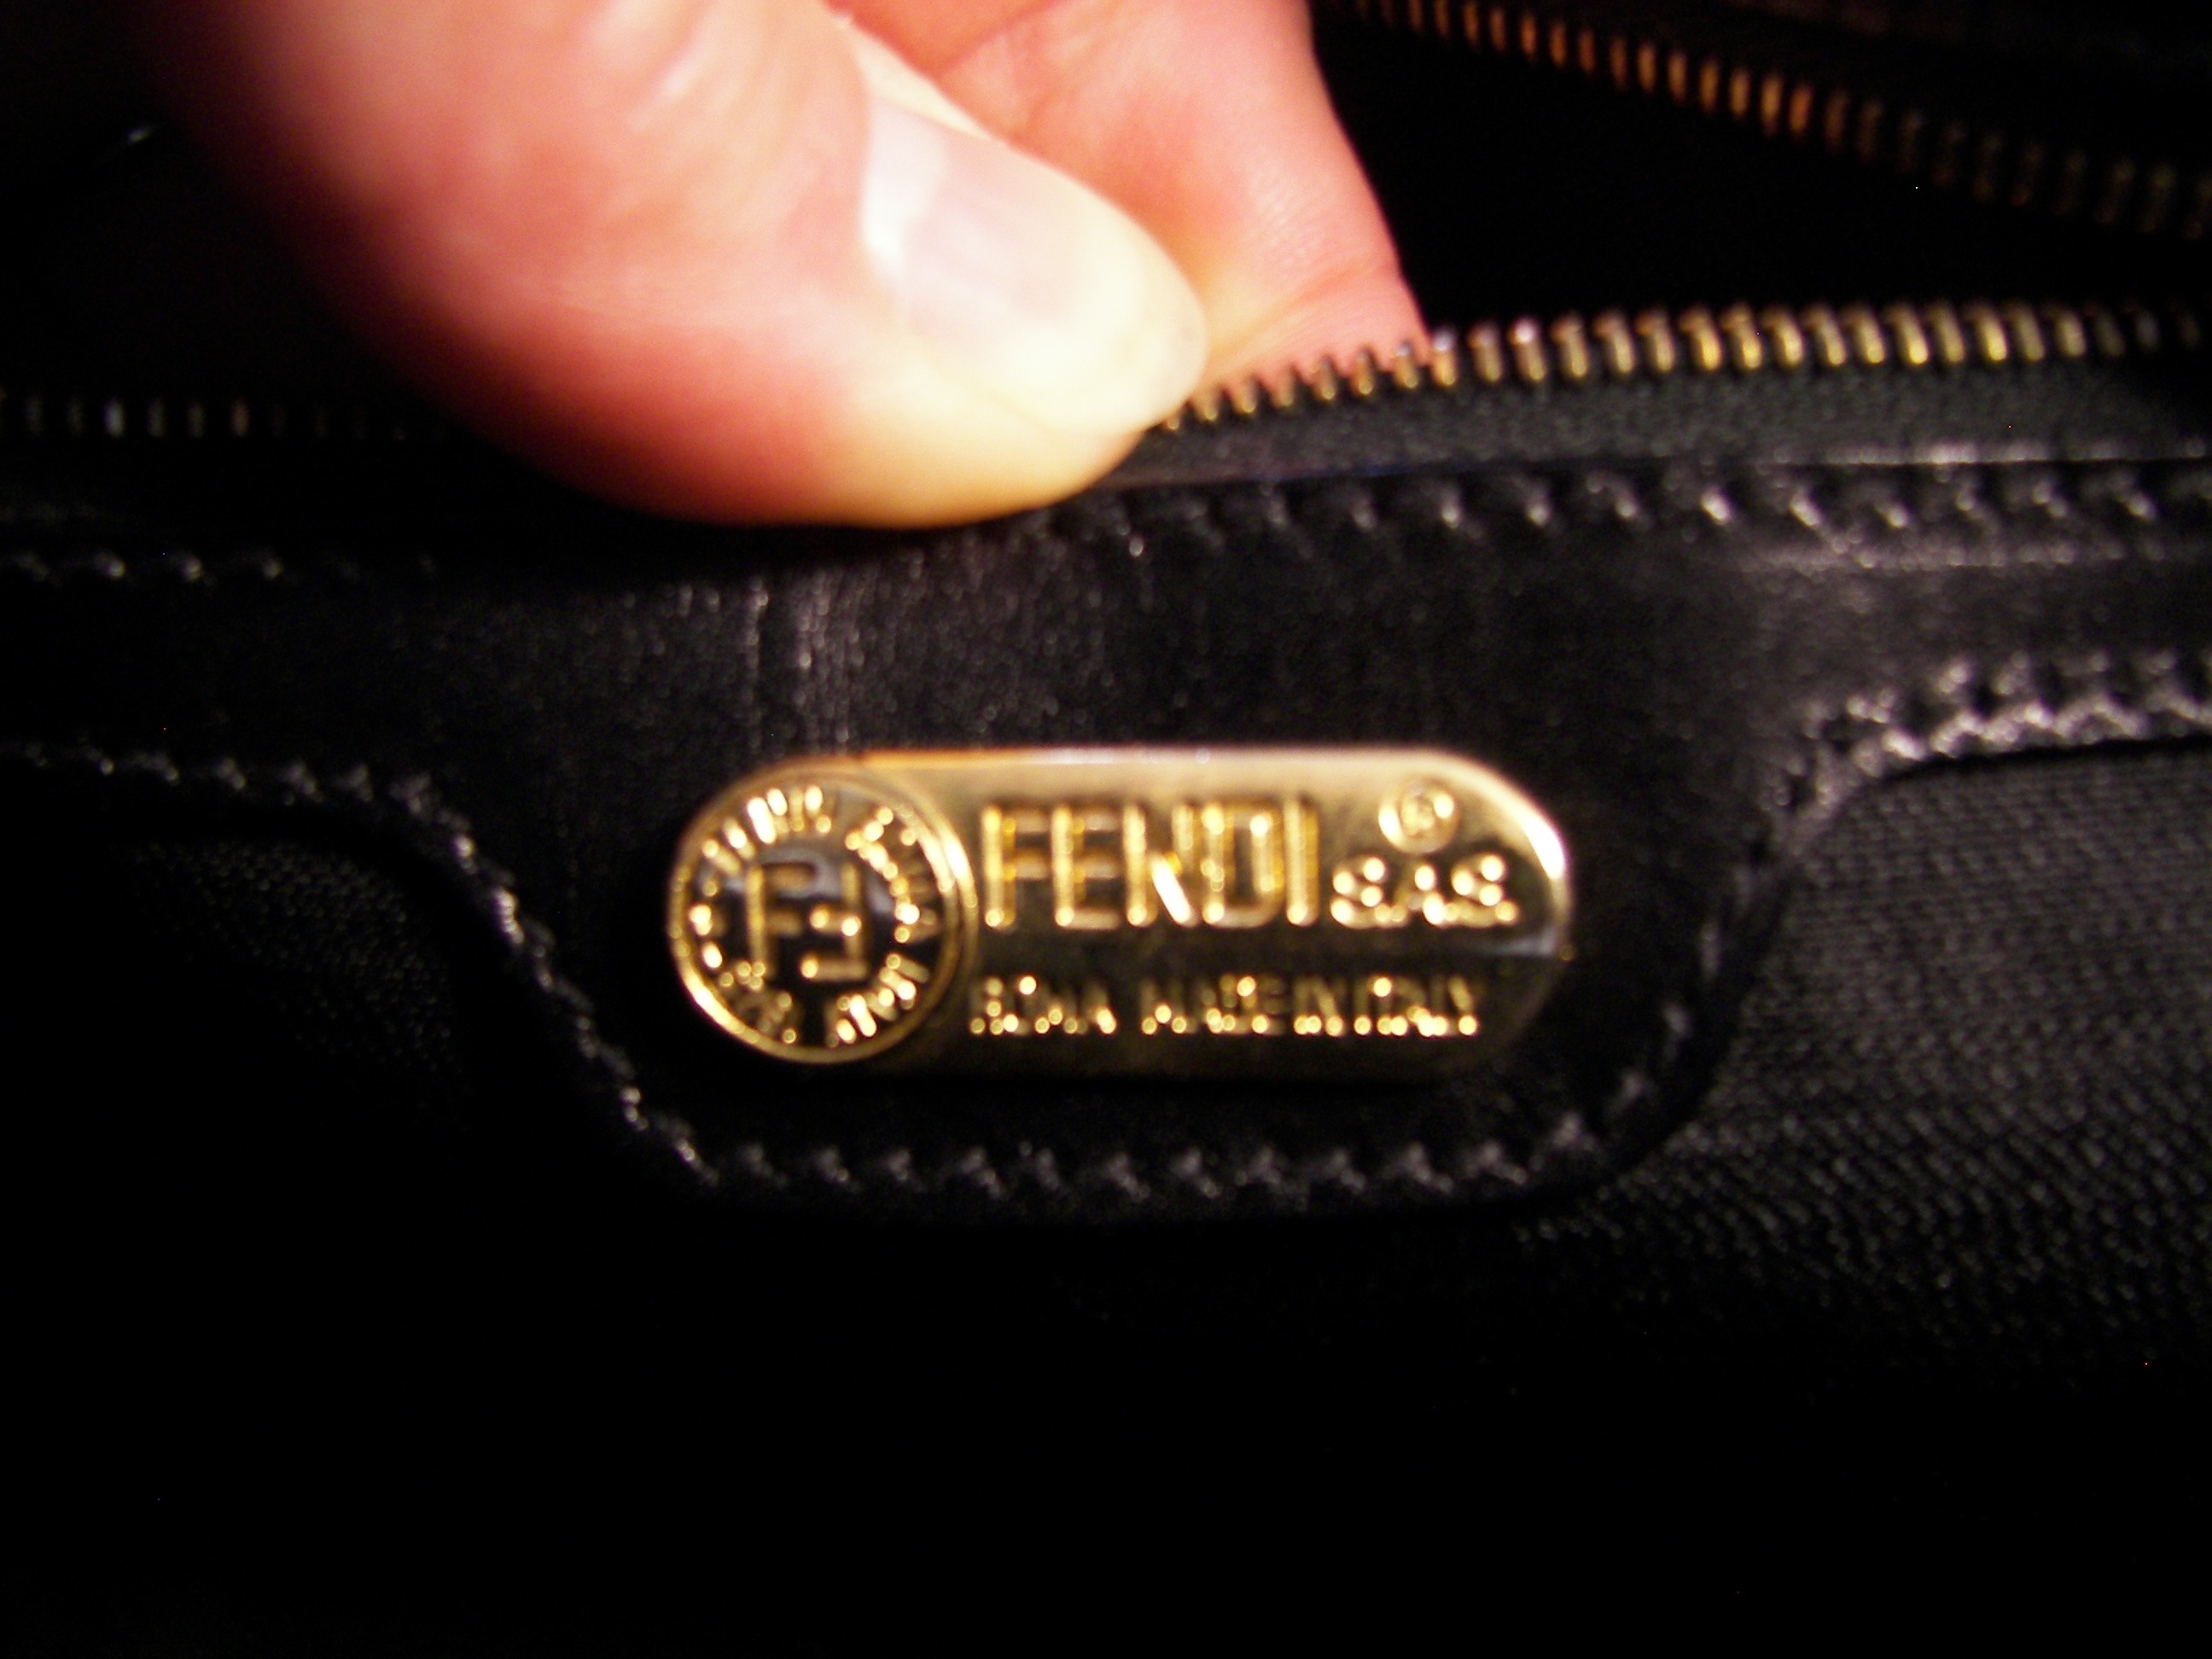 how to tell if a vintage fendi bag is real